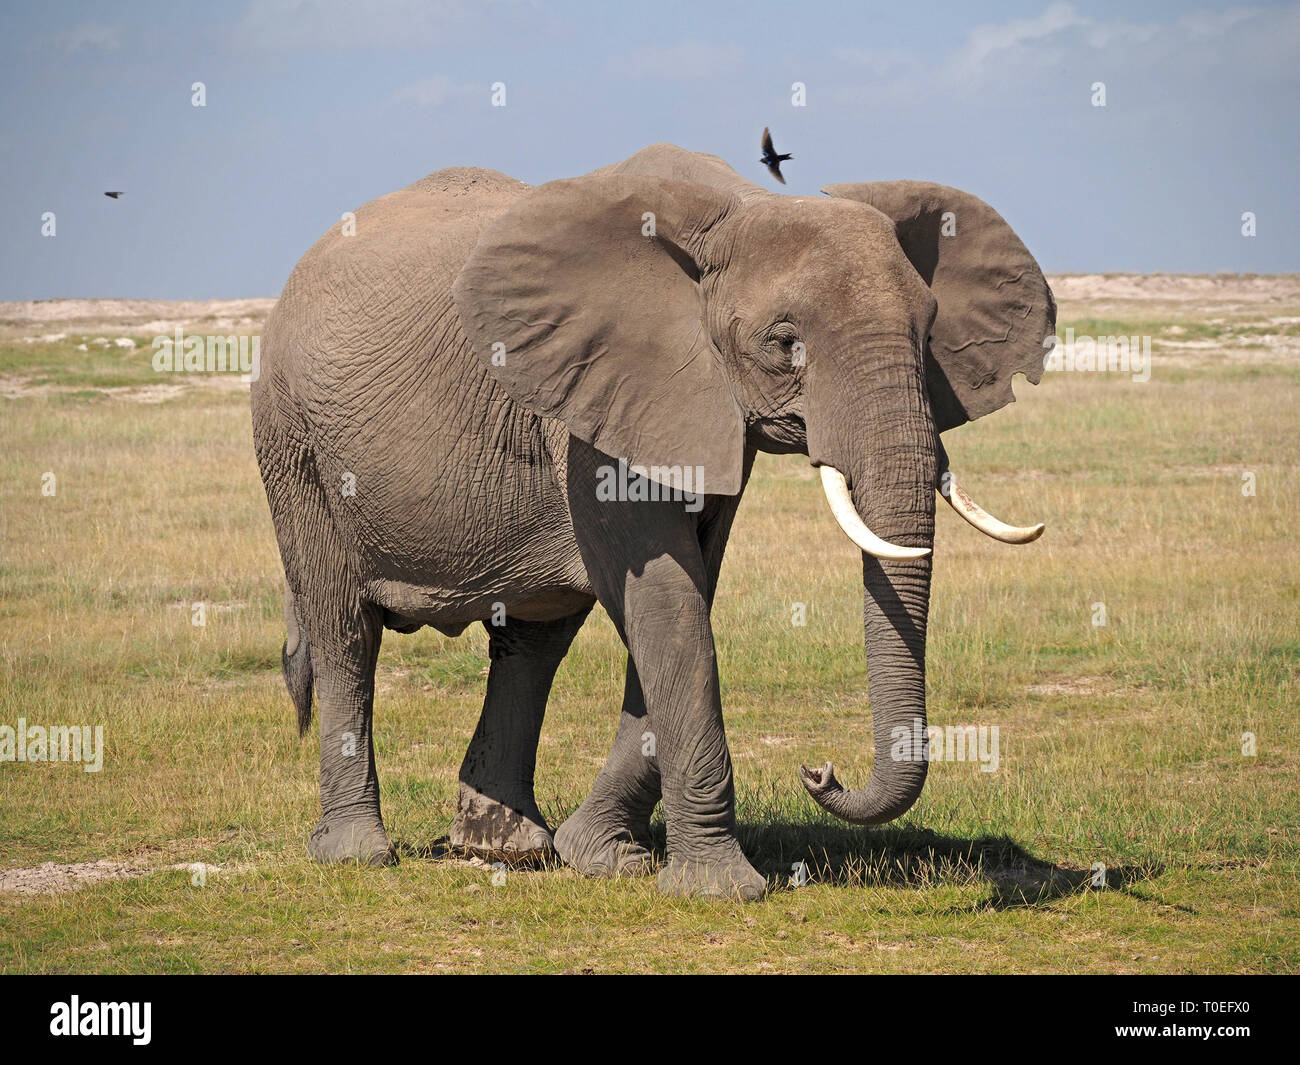 swallow flies over lone young African elephant (Loxodonta africana)  with small tusks walking in the African savannah in Kenya, East Africa Stock Photo